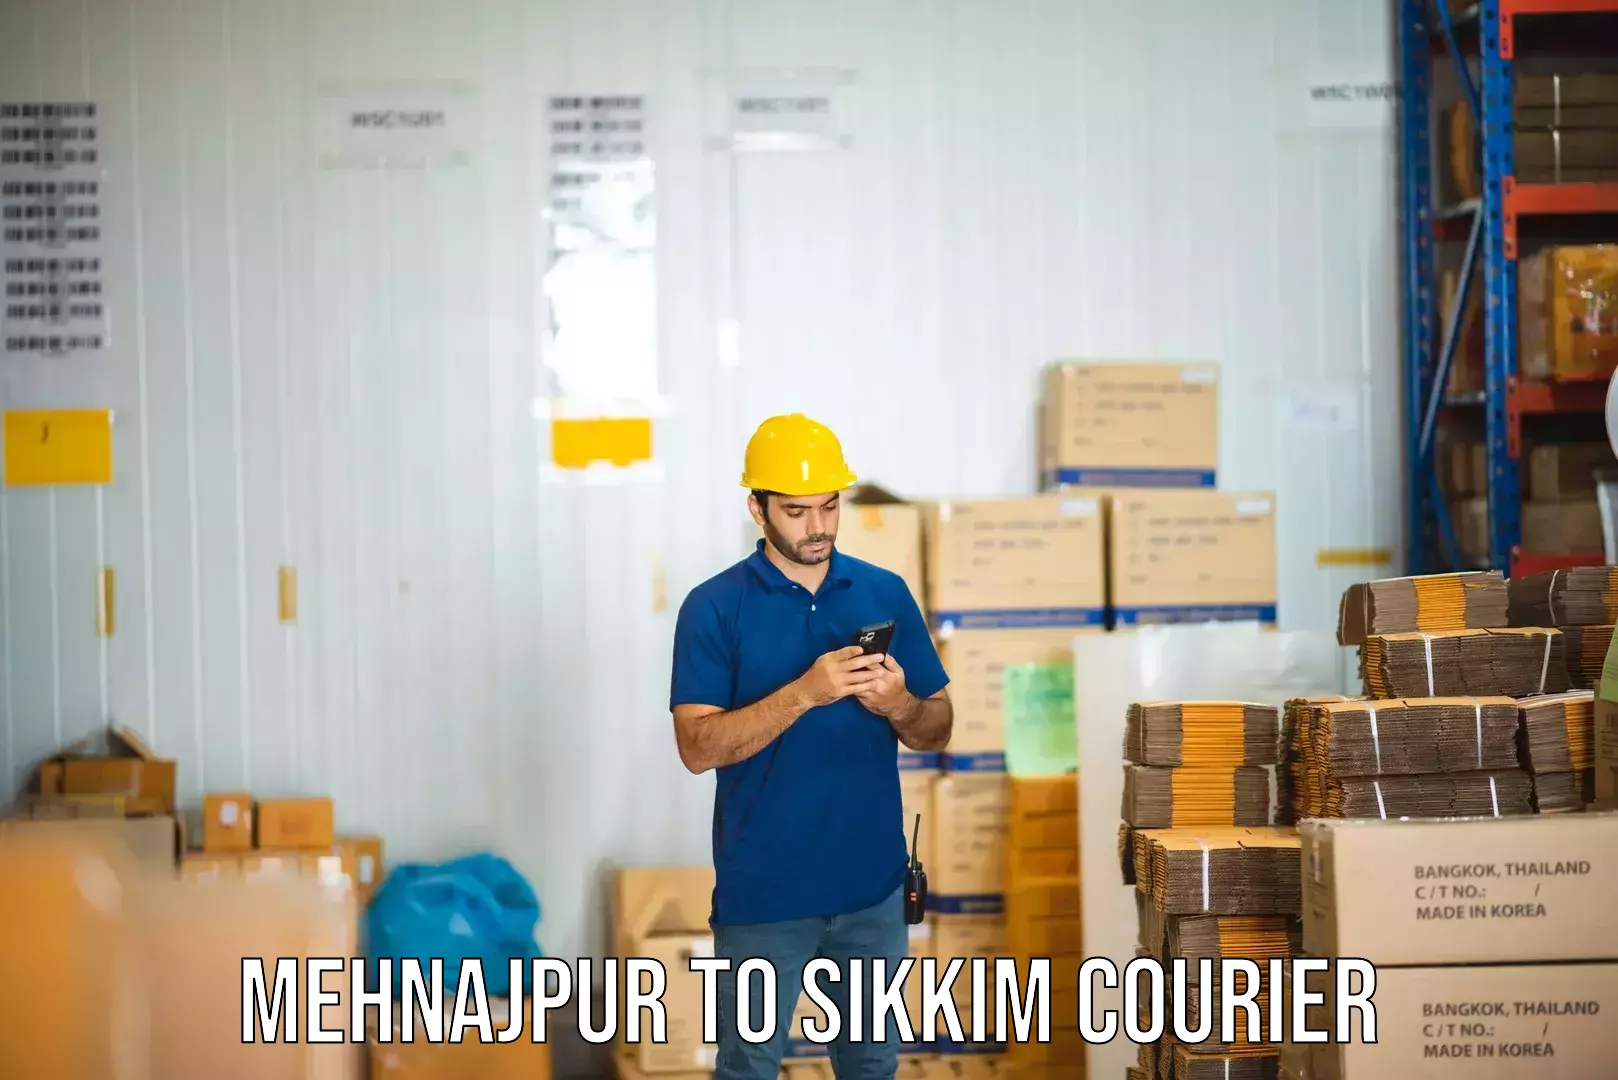 On-call courier service Mehnajpur to Pelling